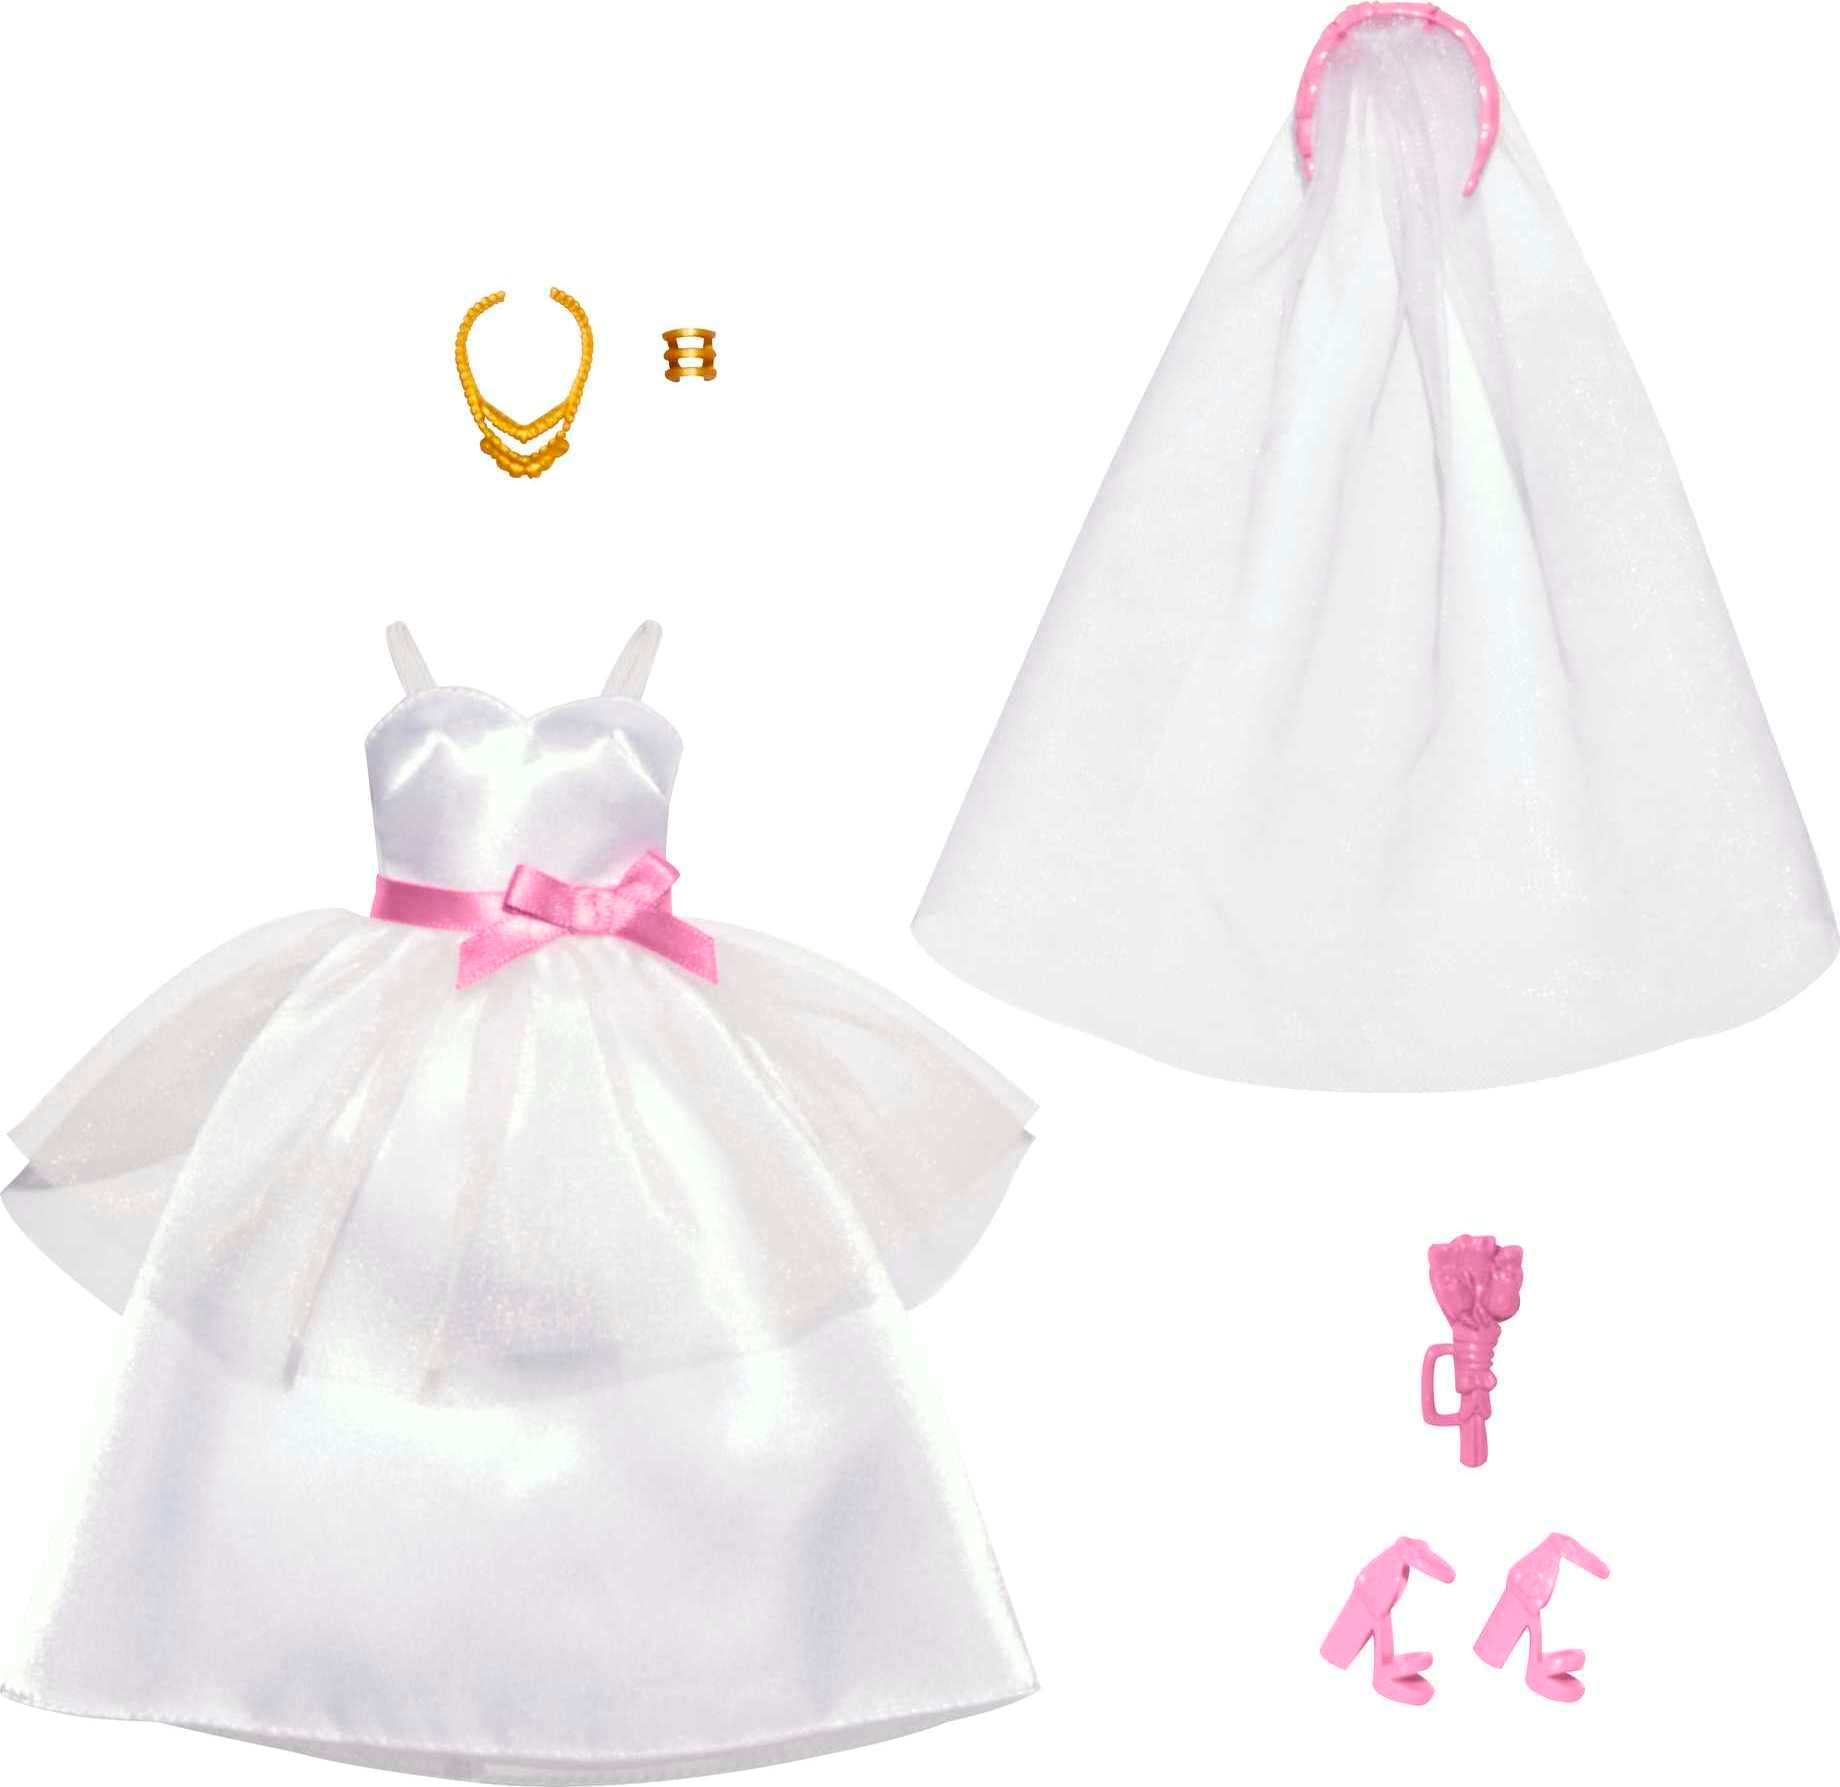 Barbie Fashions Doll Clothes and Accessories Set, Bridal Pack with Wedding Dress, Veil, Bouquet, Shoes and Jewelry